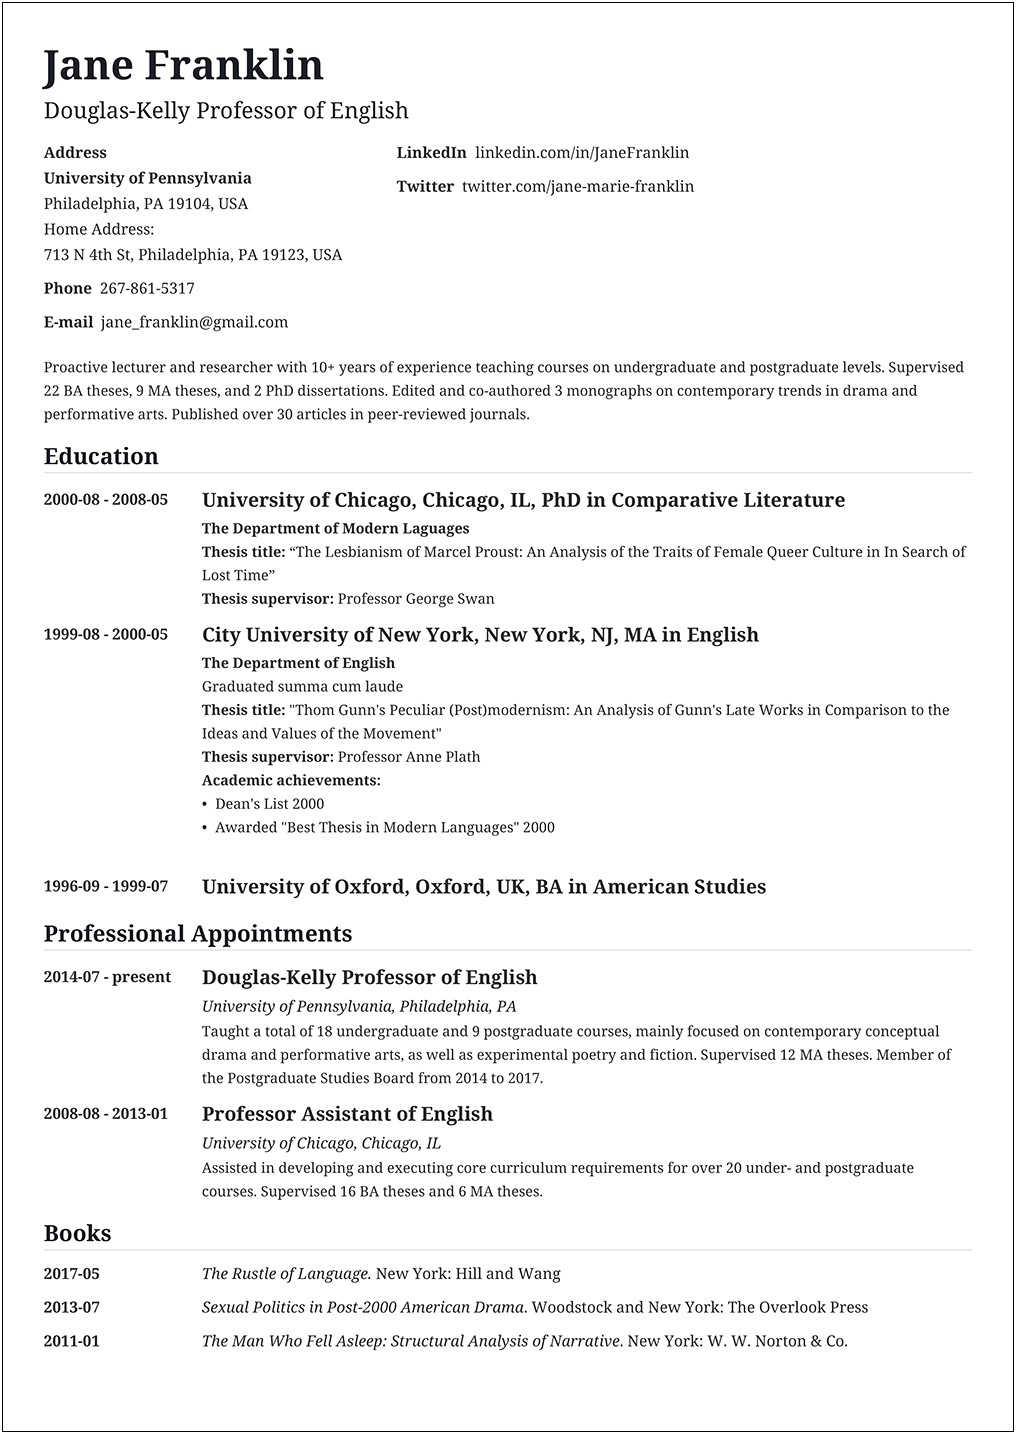 Job Application And Resume Format